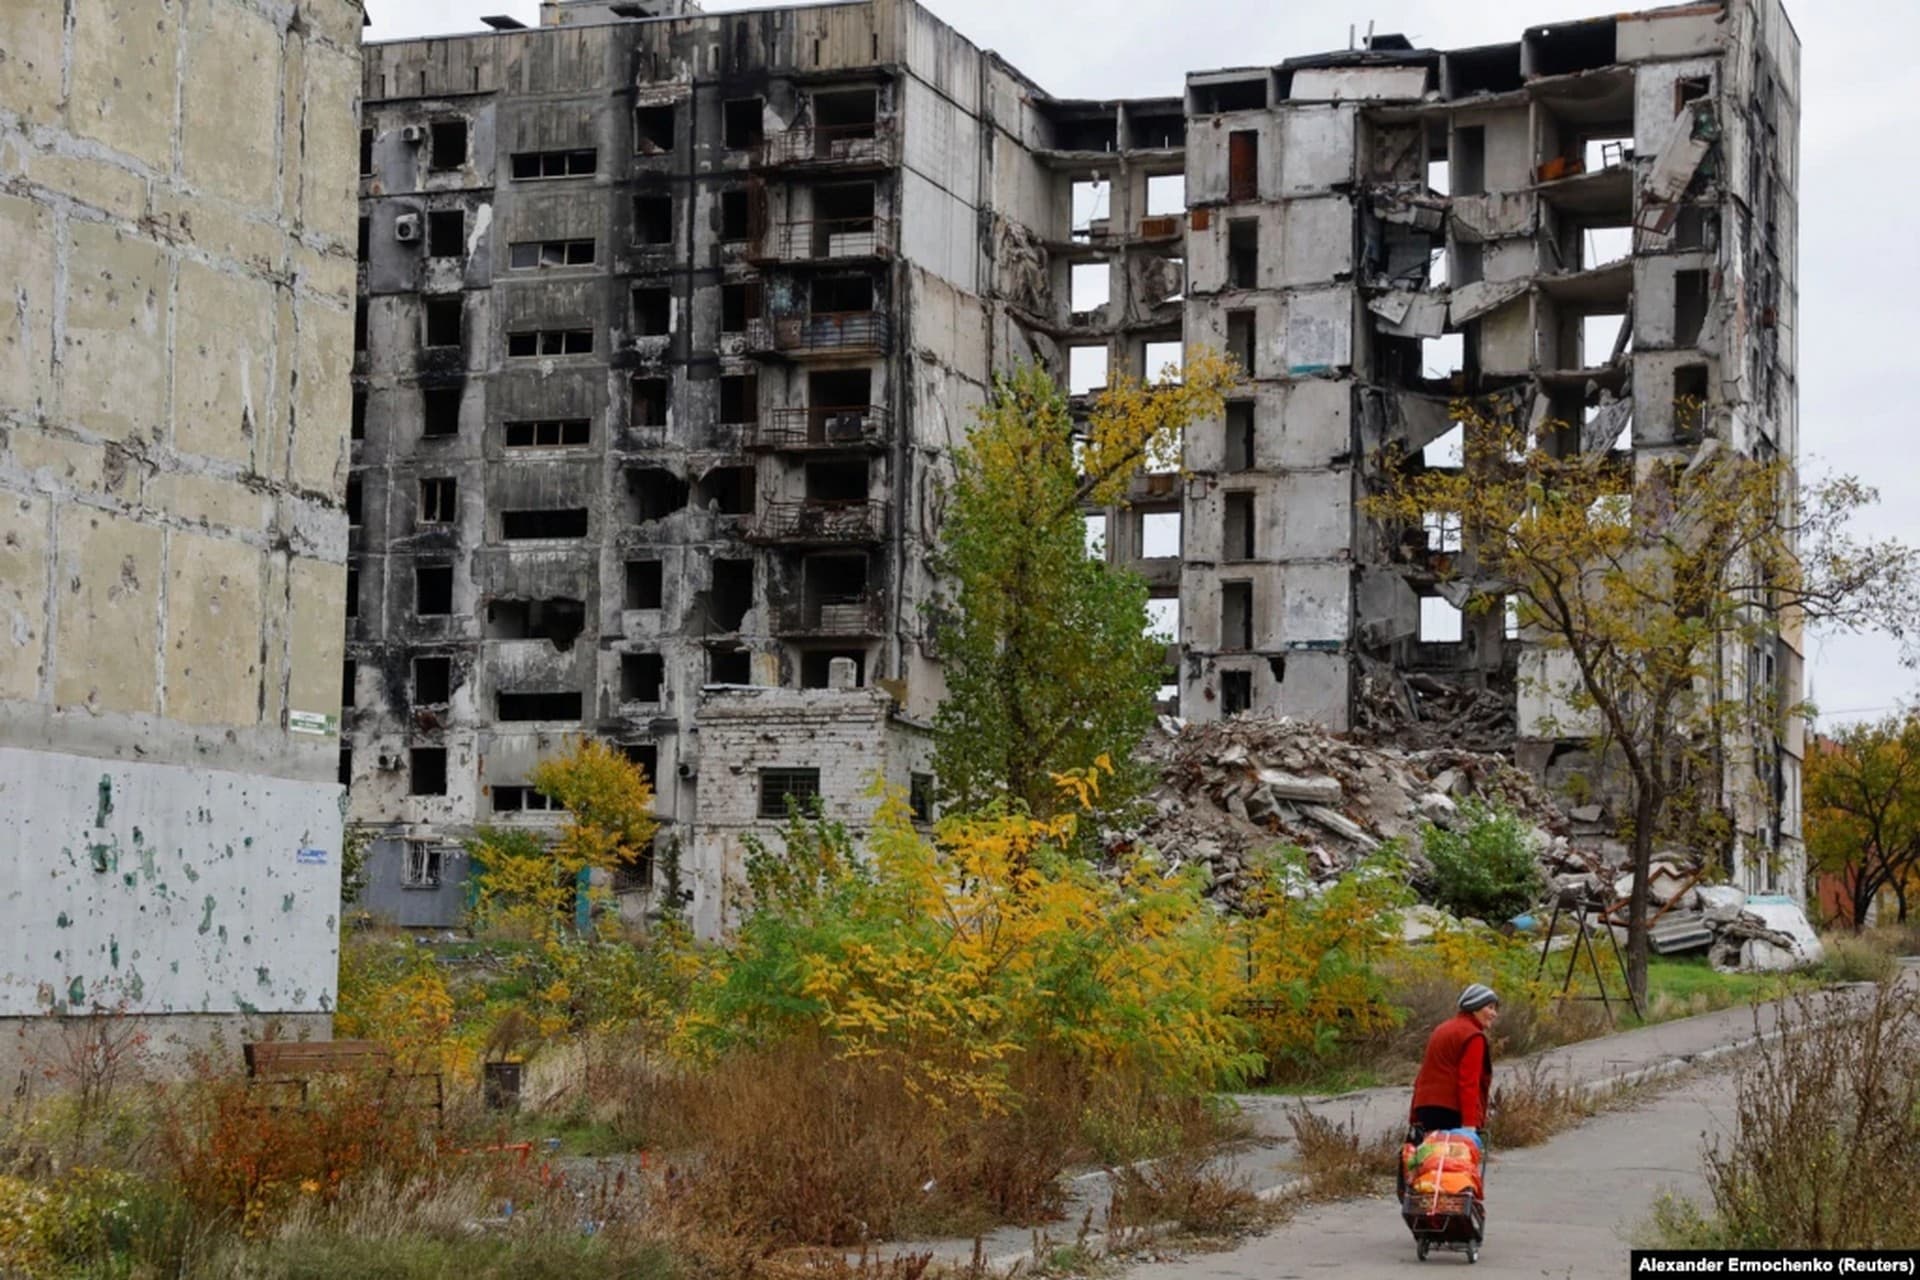 A woman walks past a ruined apartment building on October 29